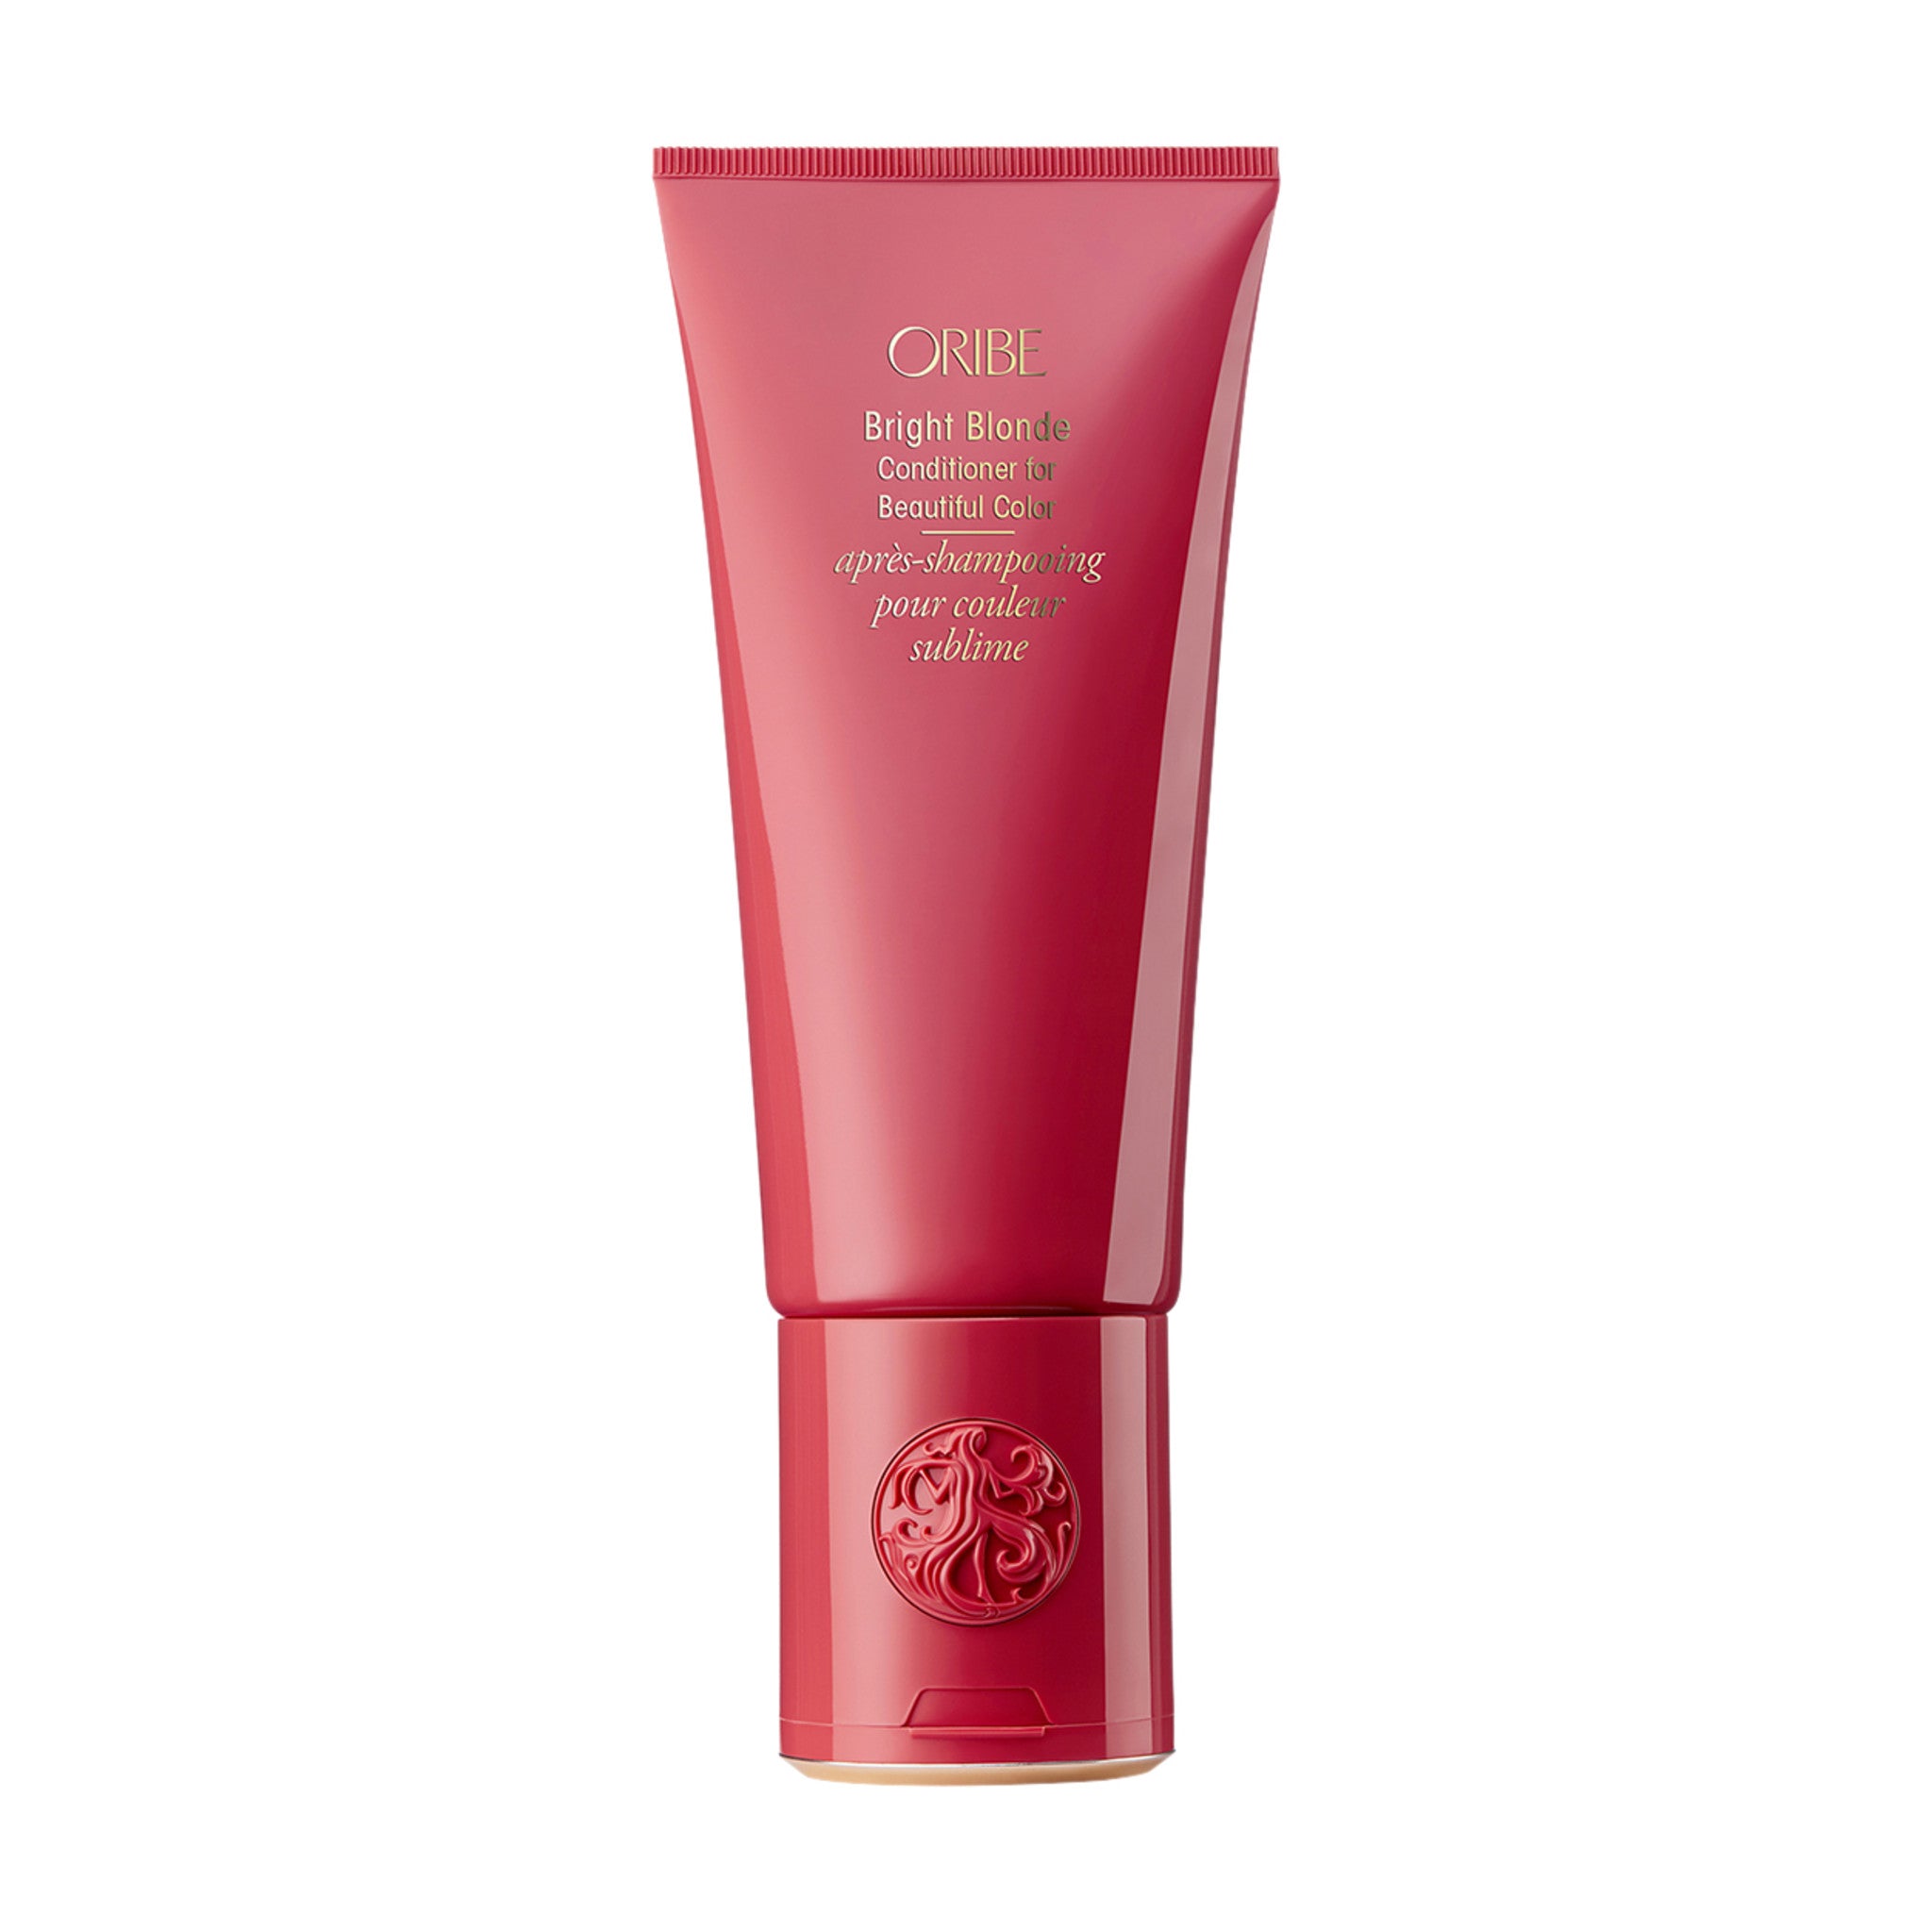 Oribe Bright Blonde For Beautiful Color Conditioner Size variant: 6.8 oz main image.